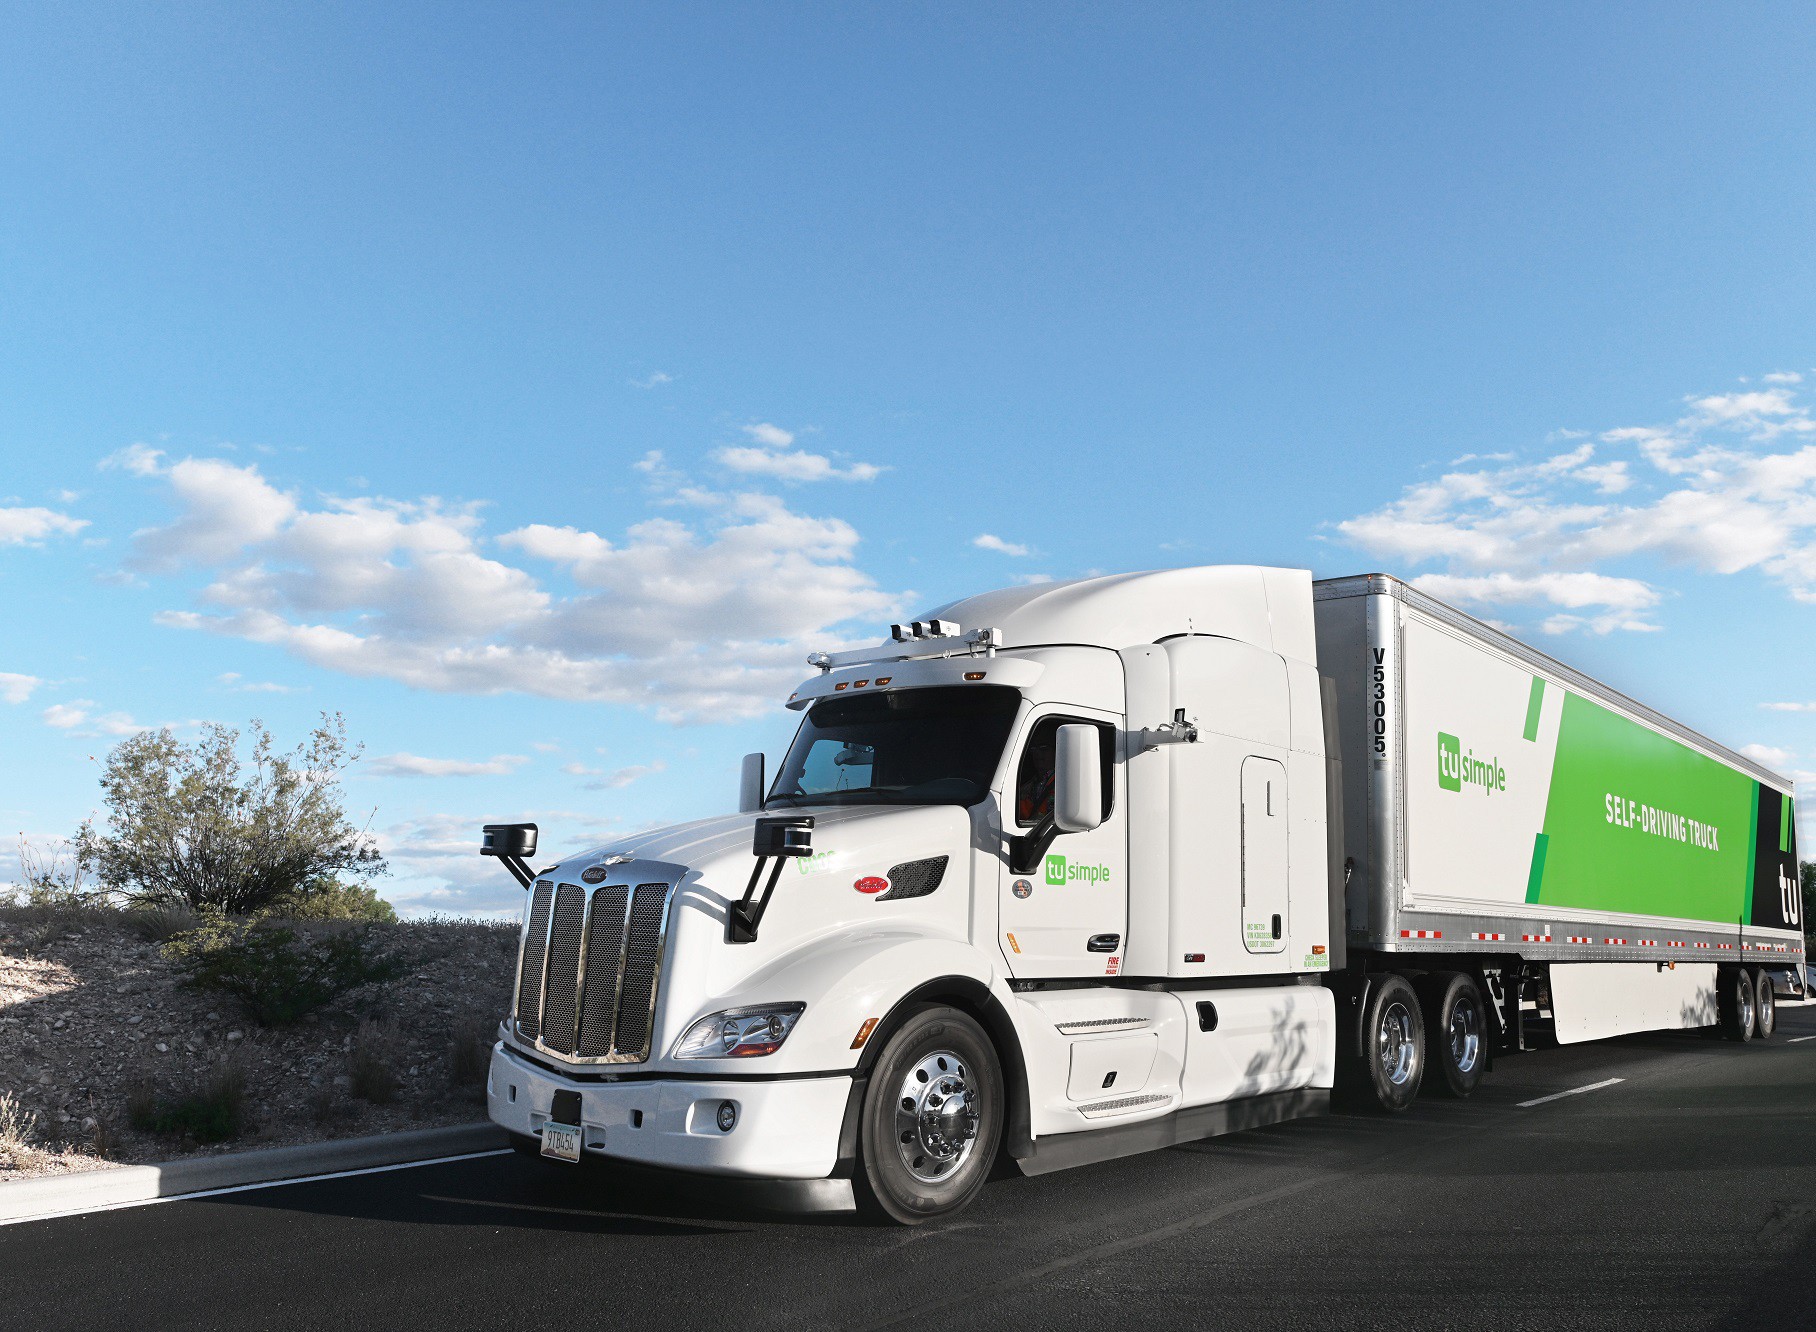 Lifeless in the Fast Lane: Robotic Semi-Truck Completes Human' Trip Between Tucson, Casa Grande | Currents Feature | Tucson Weekly